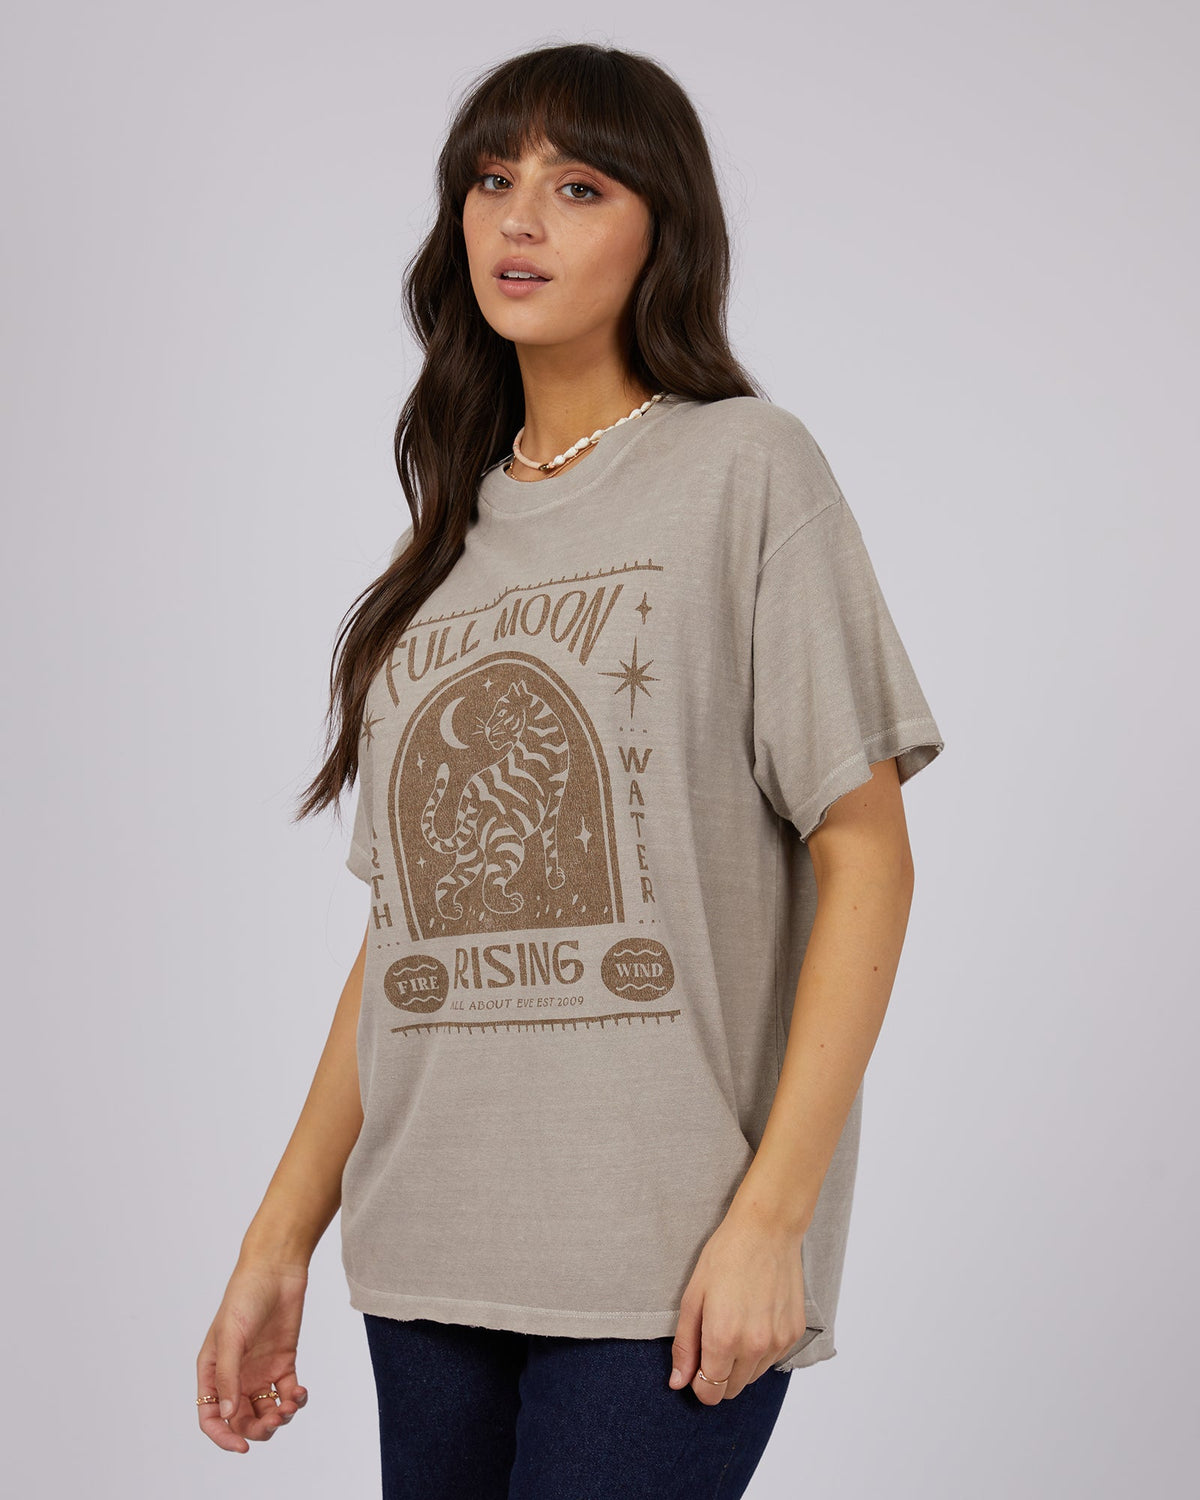 All About Eve-Rising Tee Grey-Edge Clothing